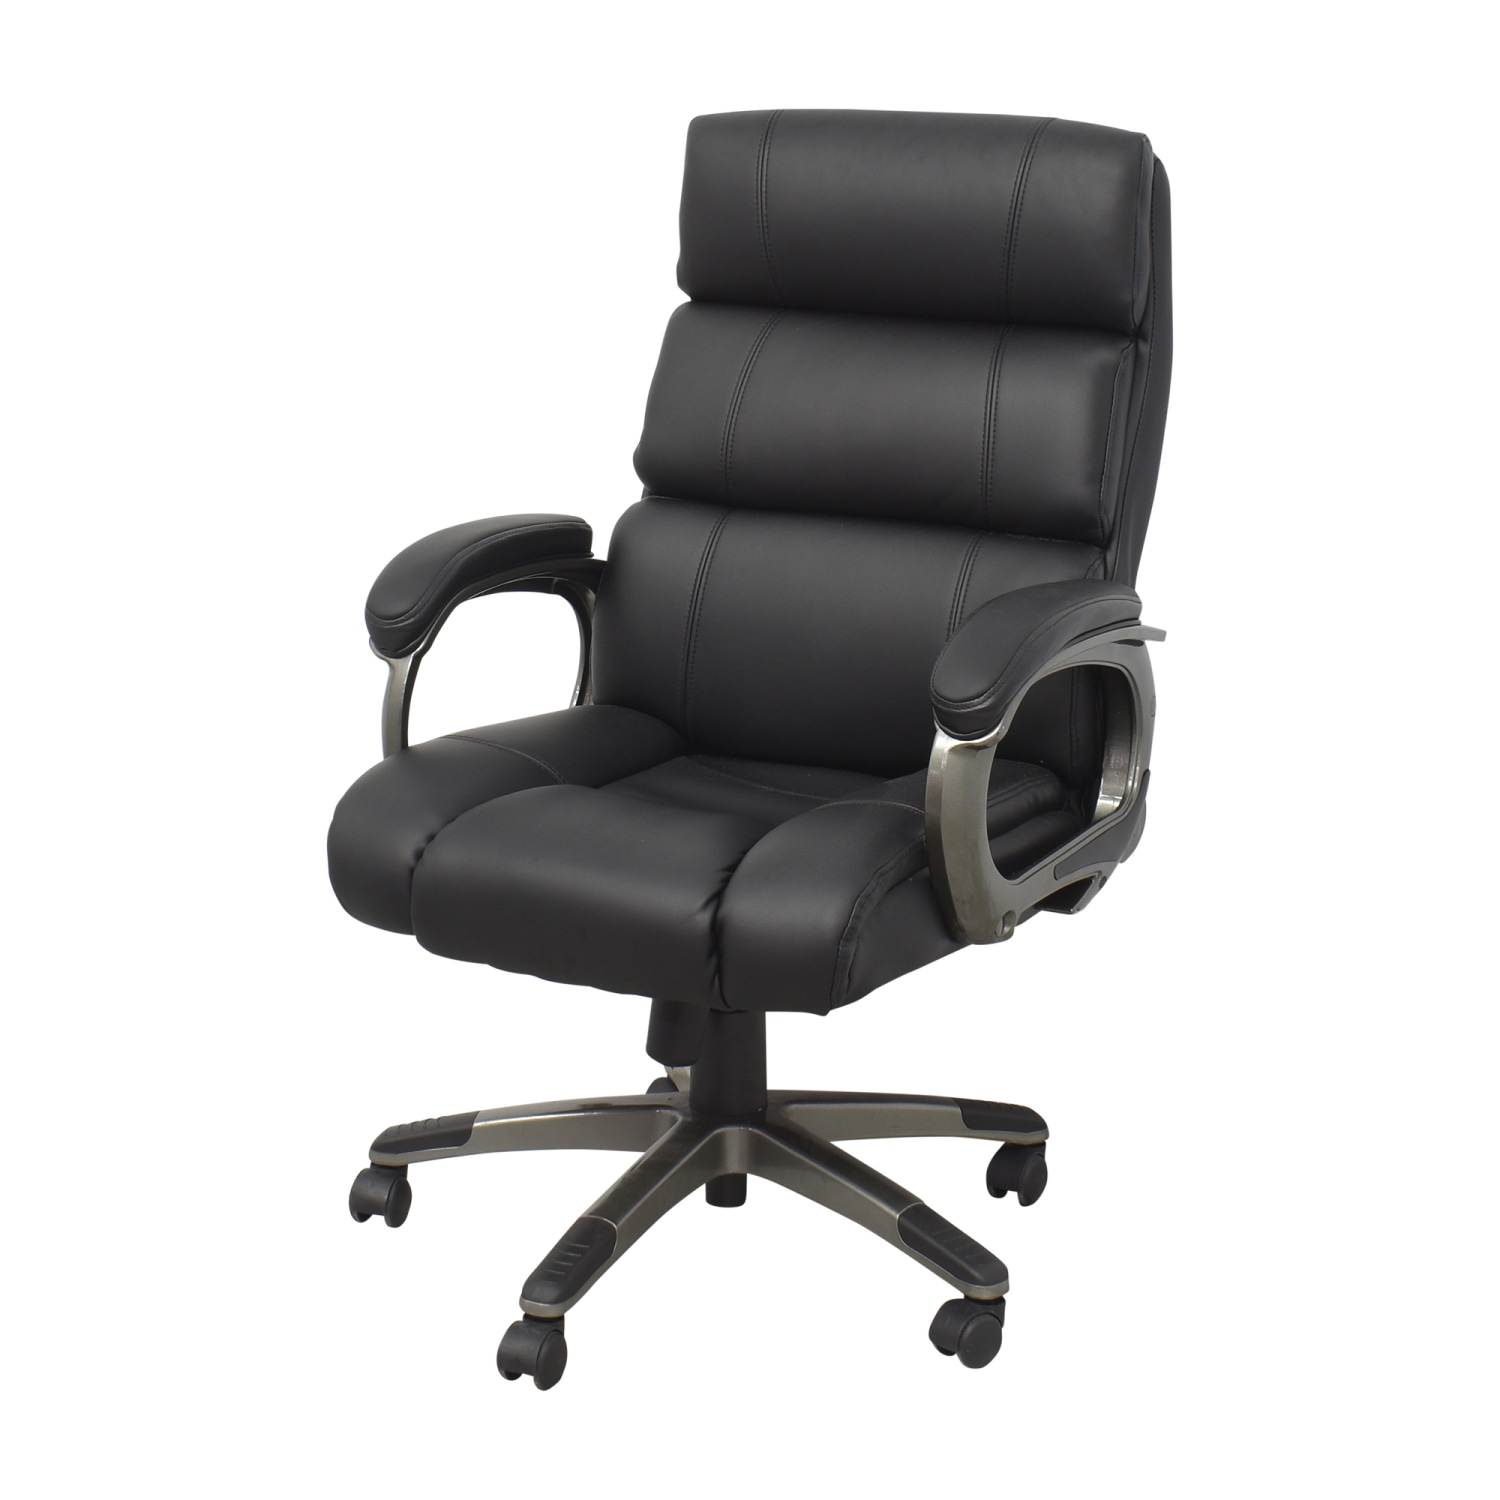 ULINE ULINE Executive Office Chair coupon